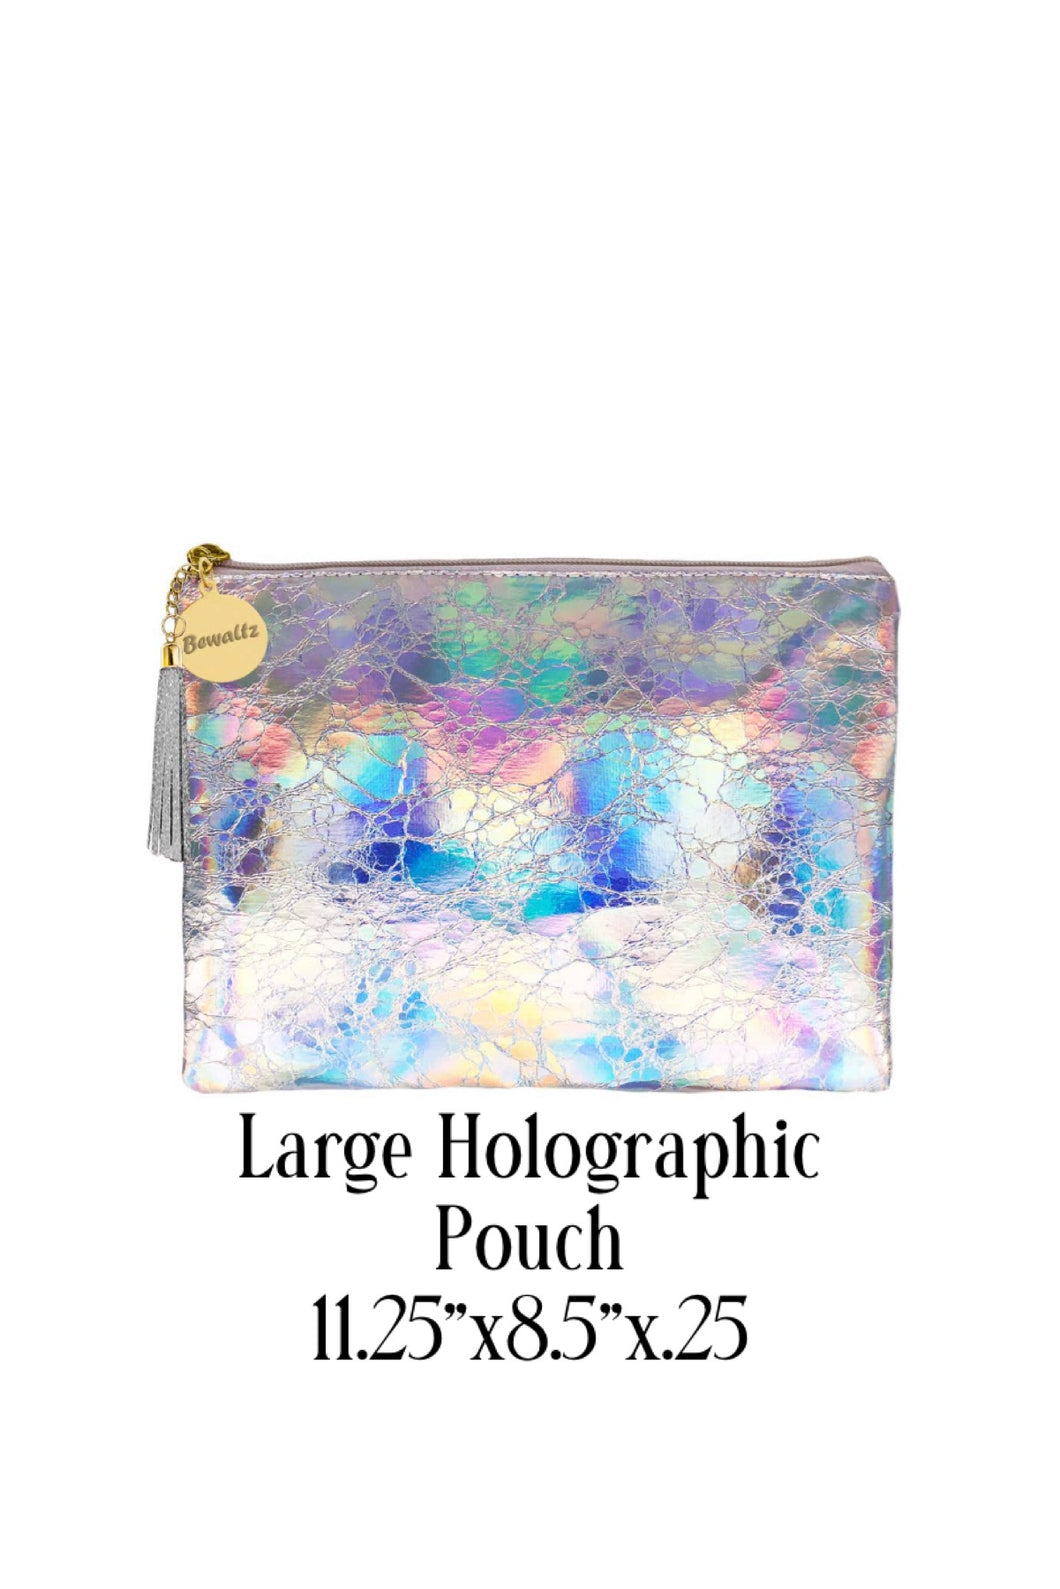 Large Holographic Pouch